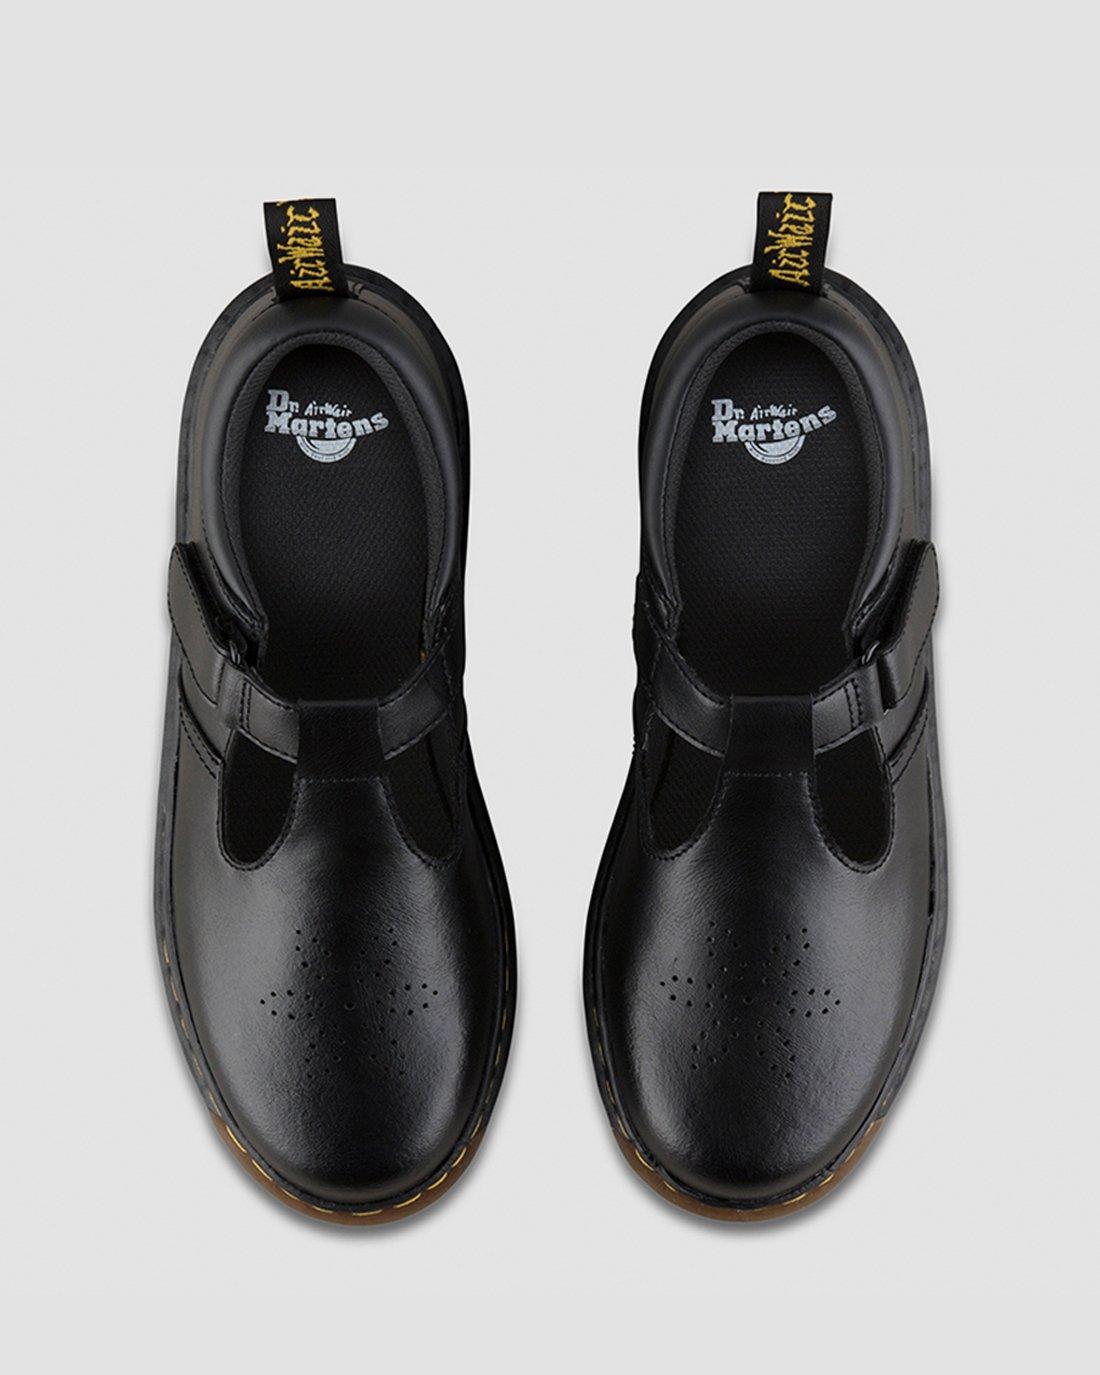 Youth DuliceJeugd Dulice Dr. Martens